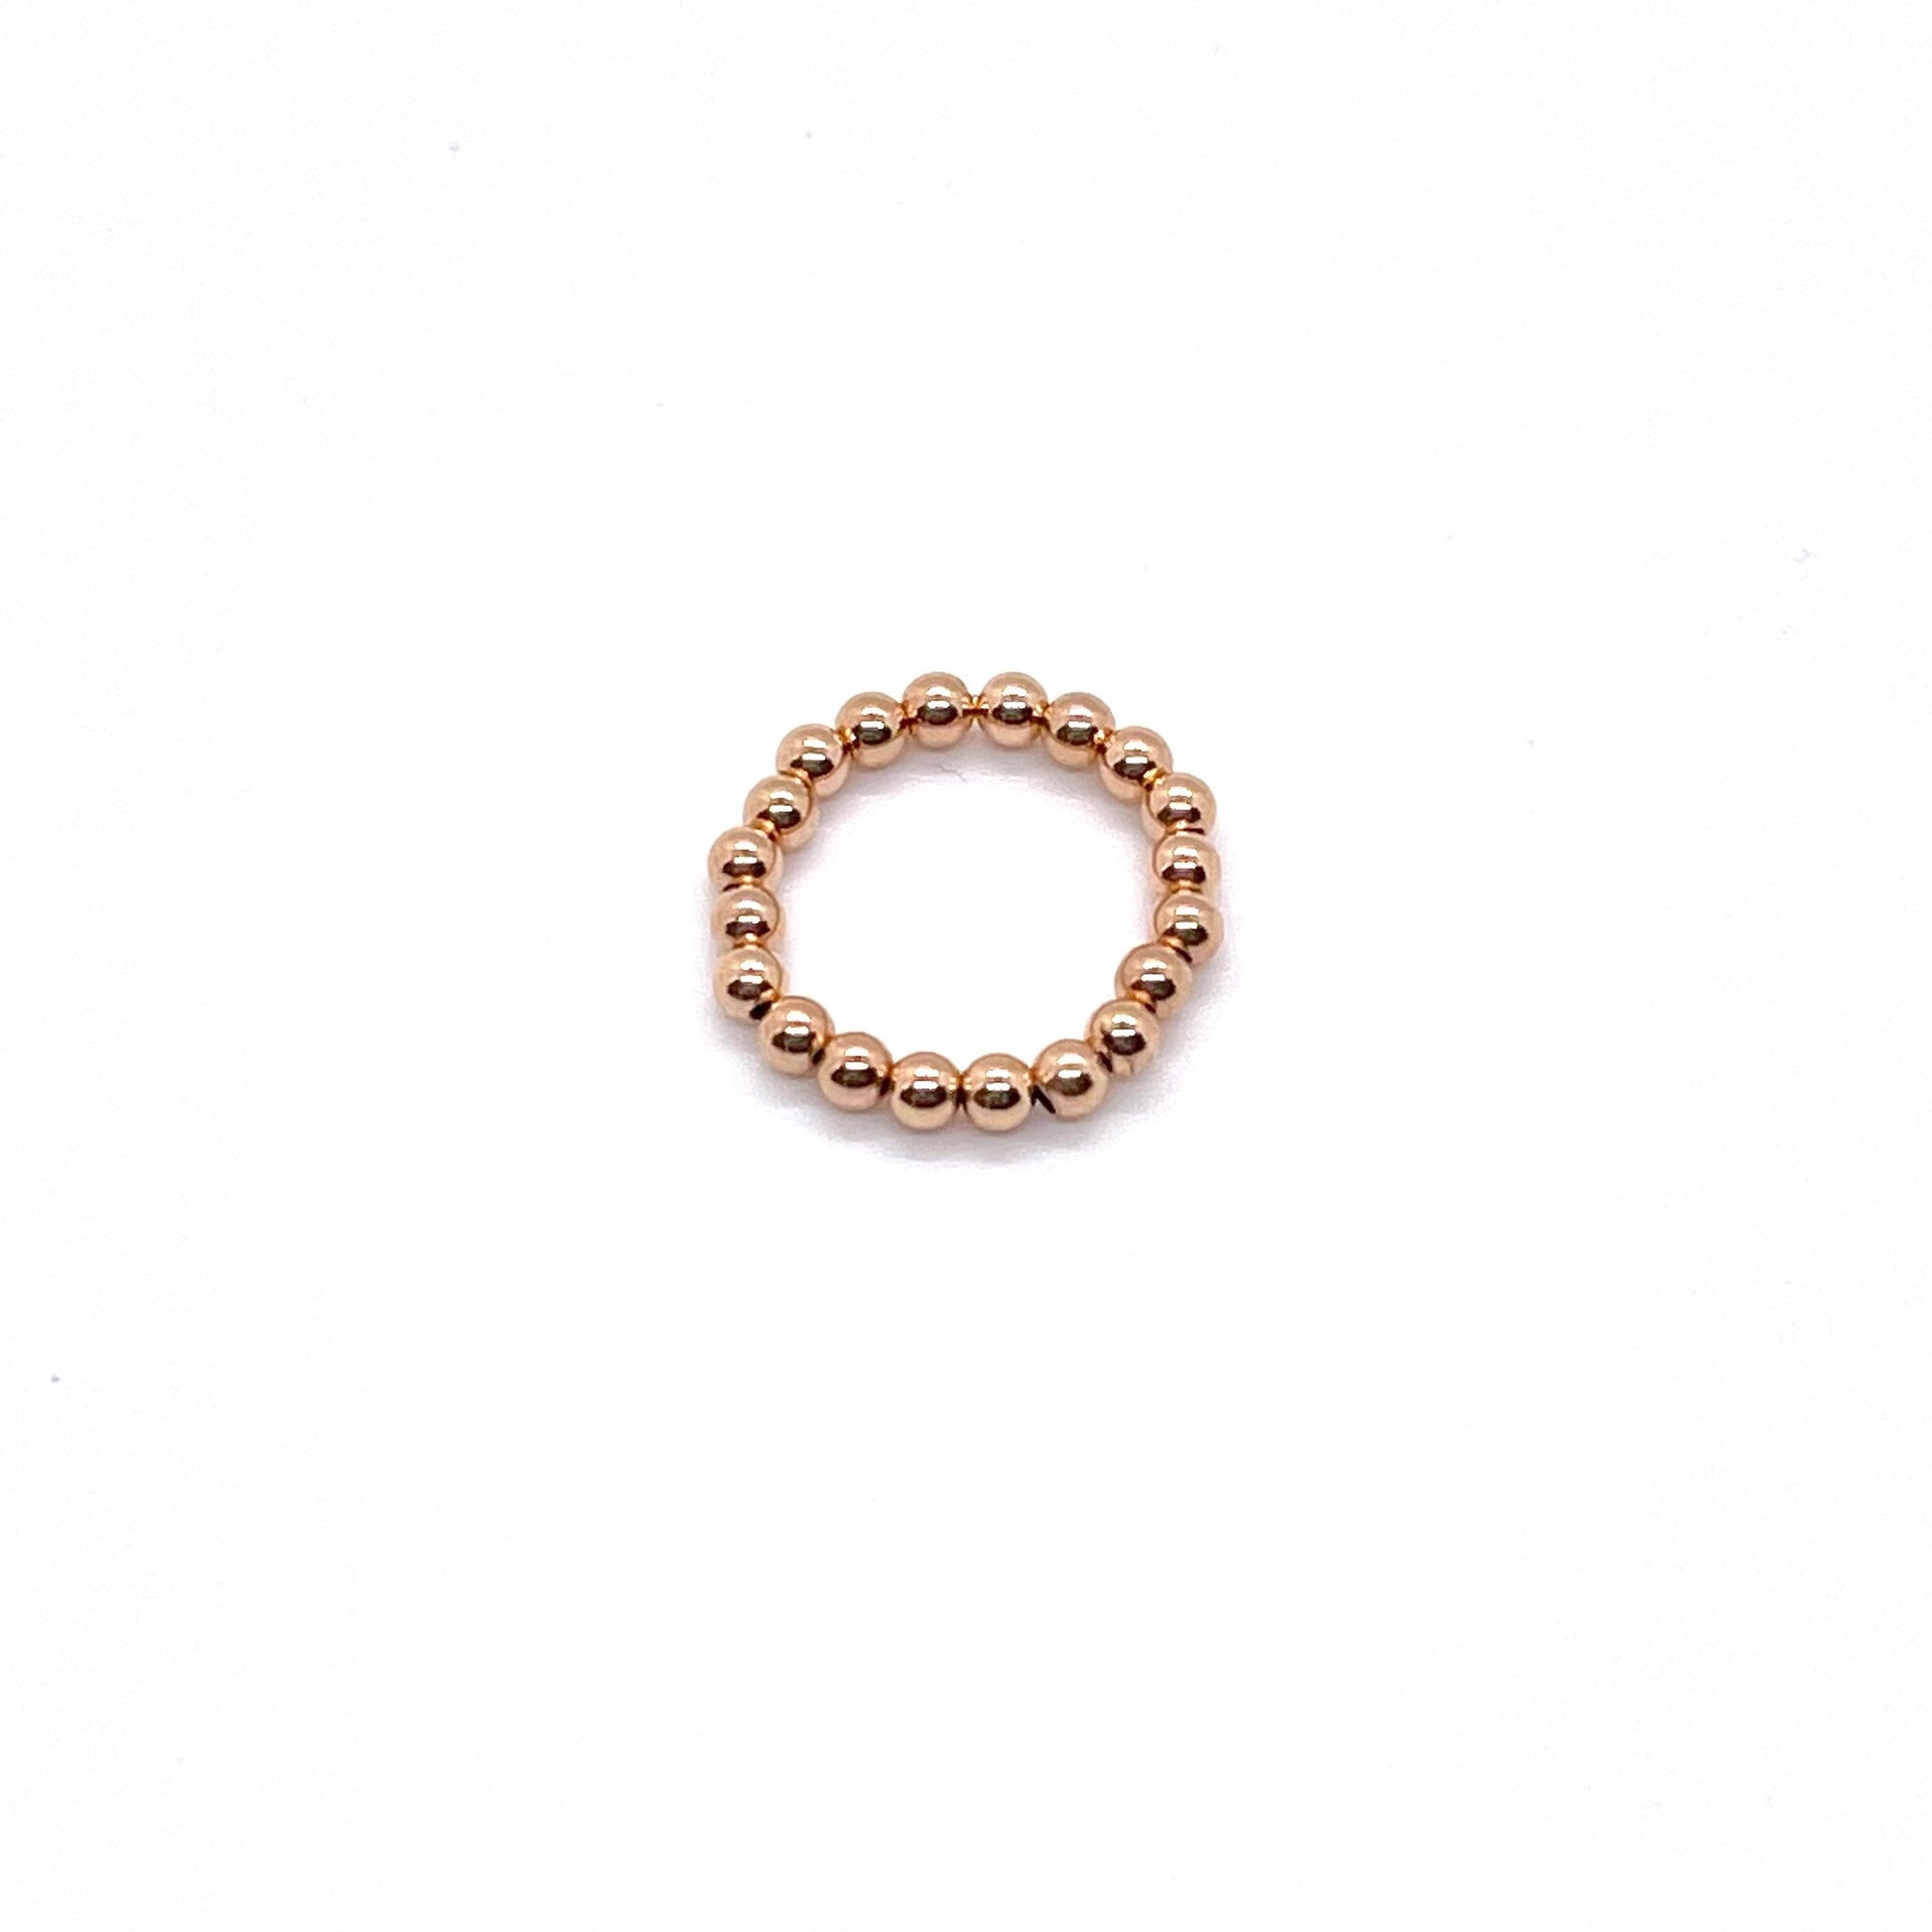 Gold beaded ring with 3mm rose gold filled waterproof beads on elastic stretch cord.